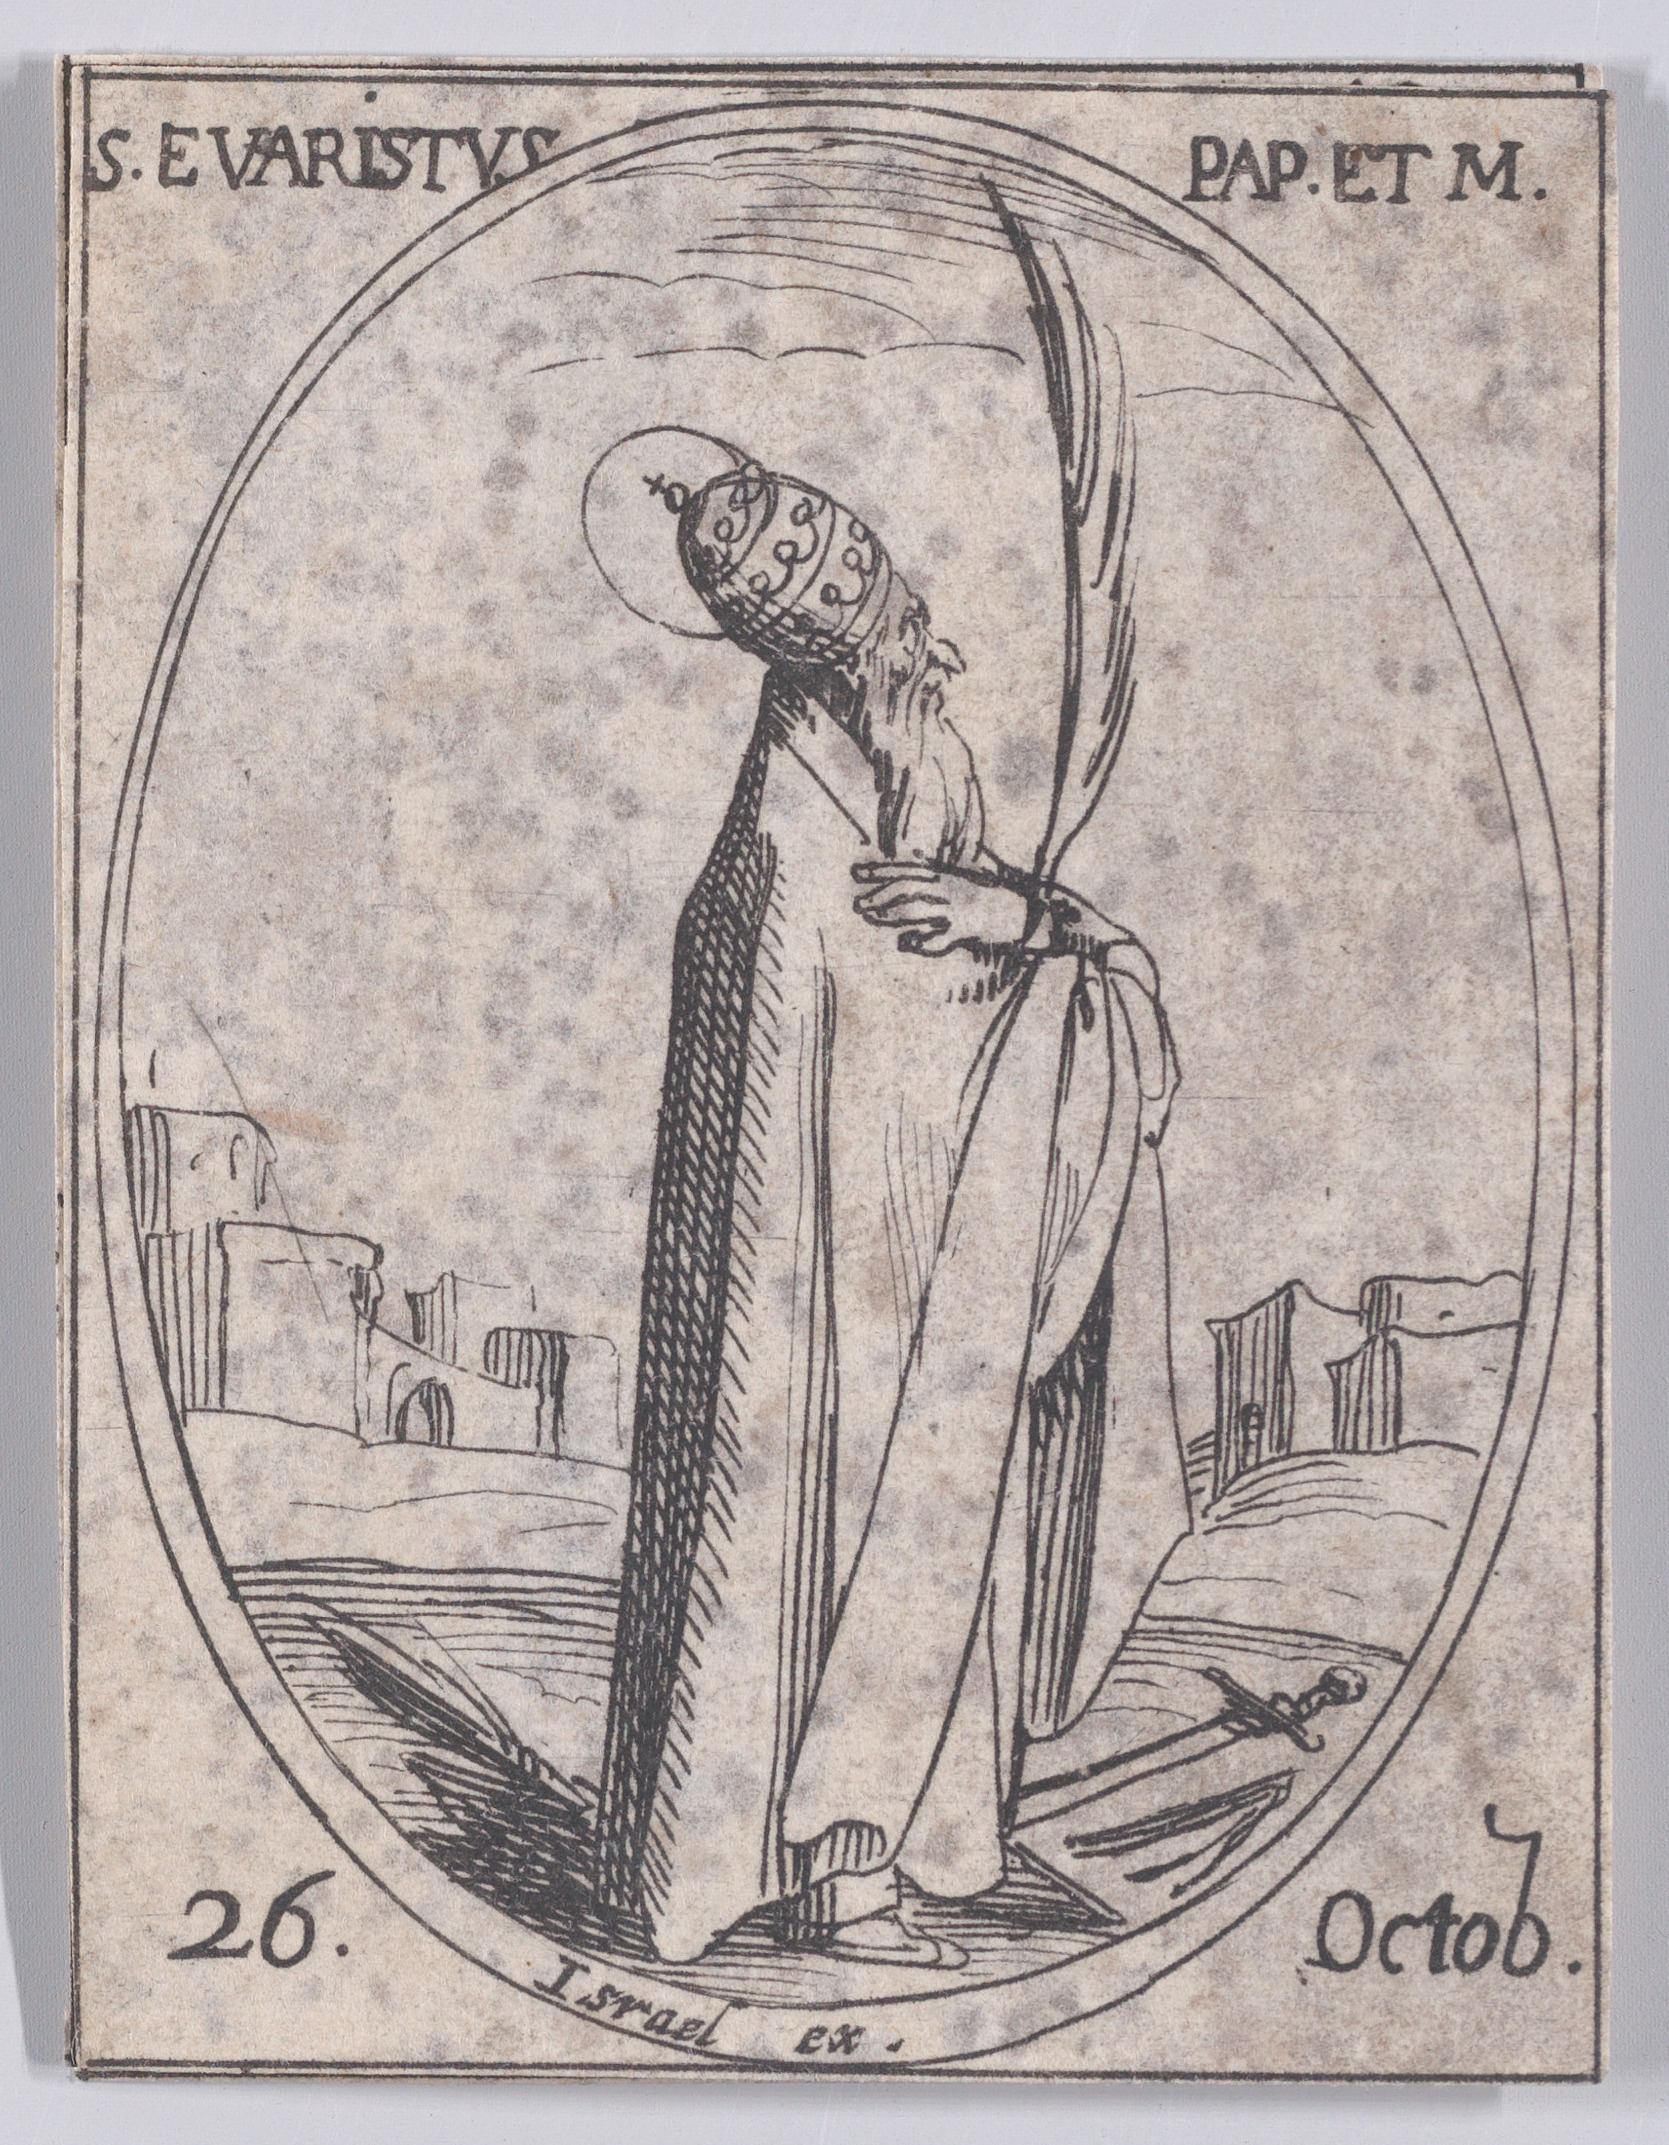 S. Evariste, pape et martyr (St. Evaristus, Pope and Martyr), October 26th, from Les Images De Tous Les Saincts et Saintes de L'Année (Images of All of the Saints and Religious Events of the Year), Jacques Callot (French, Nancy 1592–1635 Nancy), Etching; second state of two (Lieure)